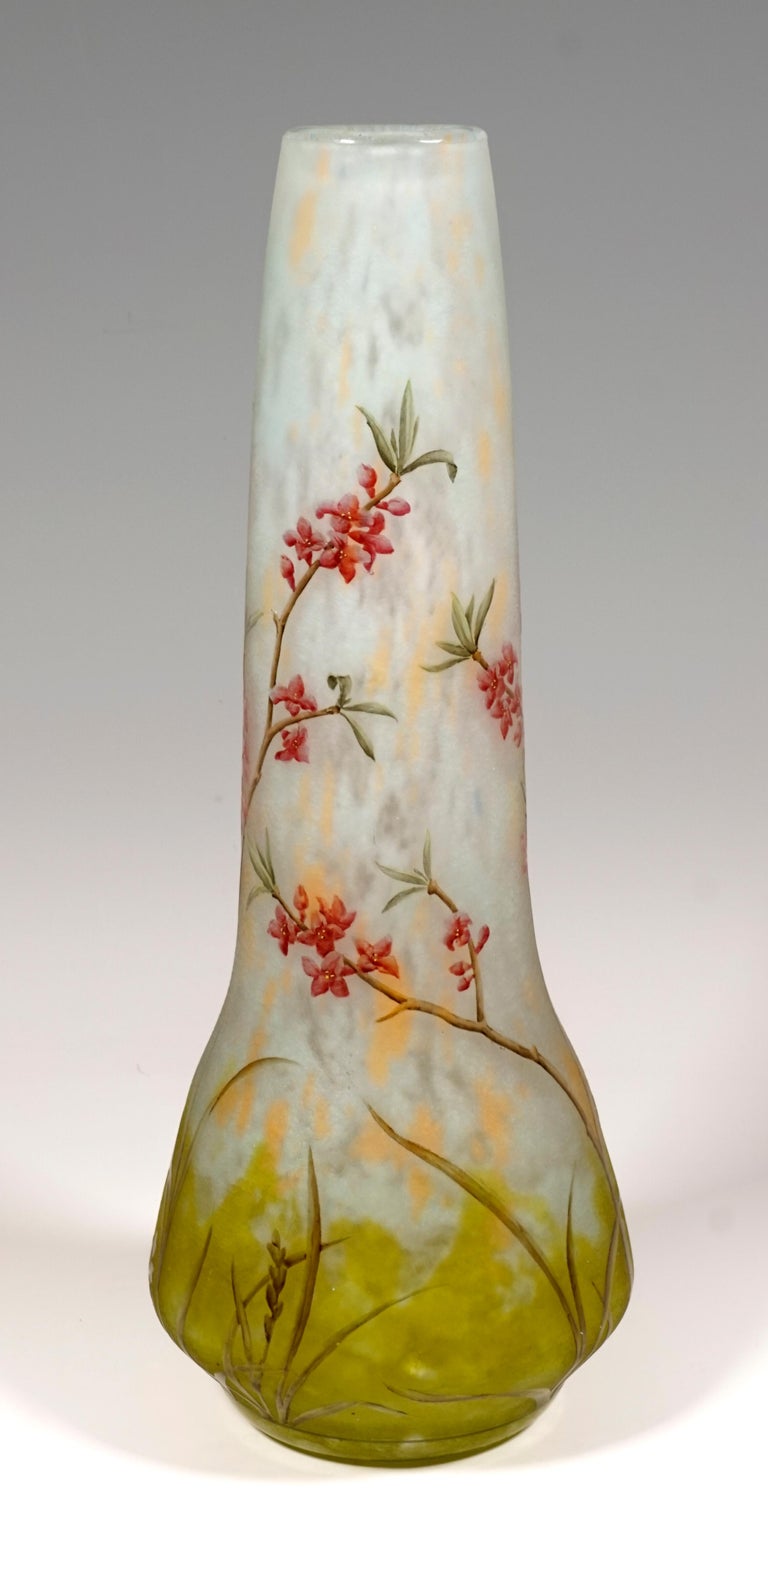 Large Art Nouveau Cameo Vase with Oleander Decor, Daum Nancy, France, 1910/15 In Good Condition For Sale In Vienna, AT